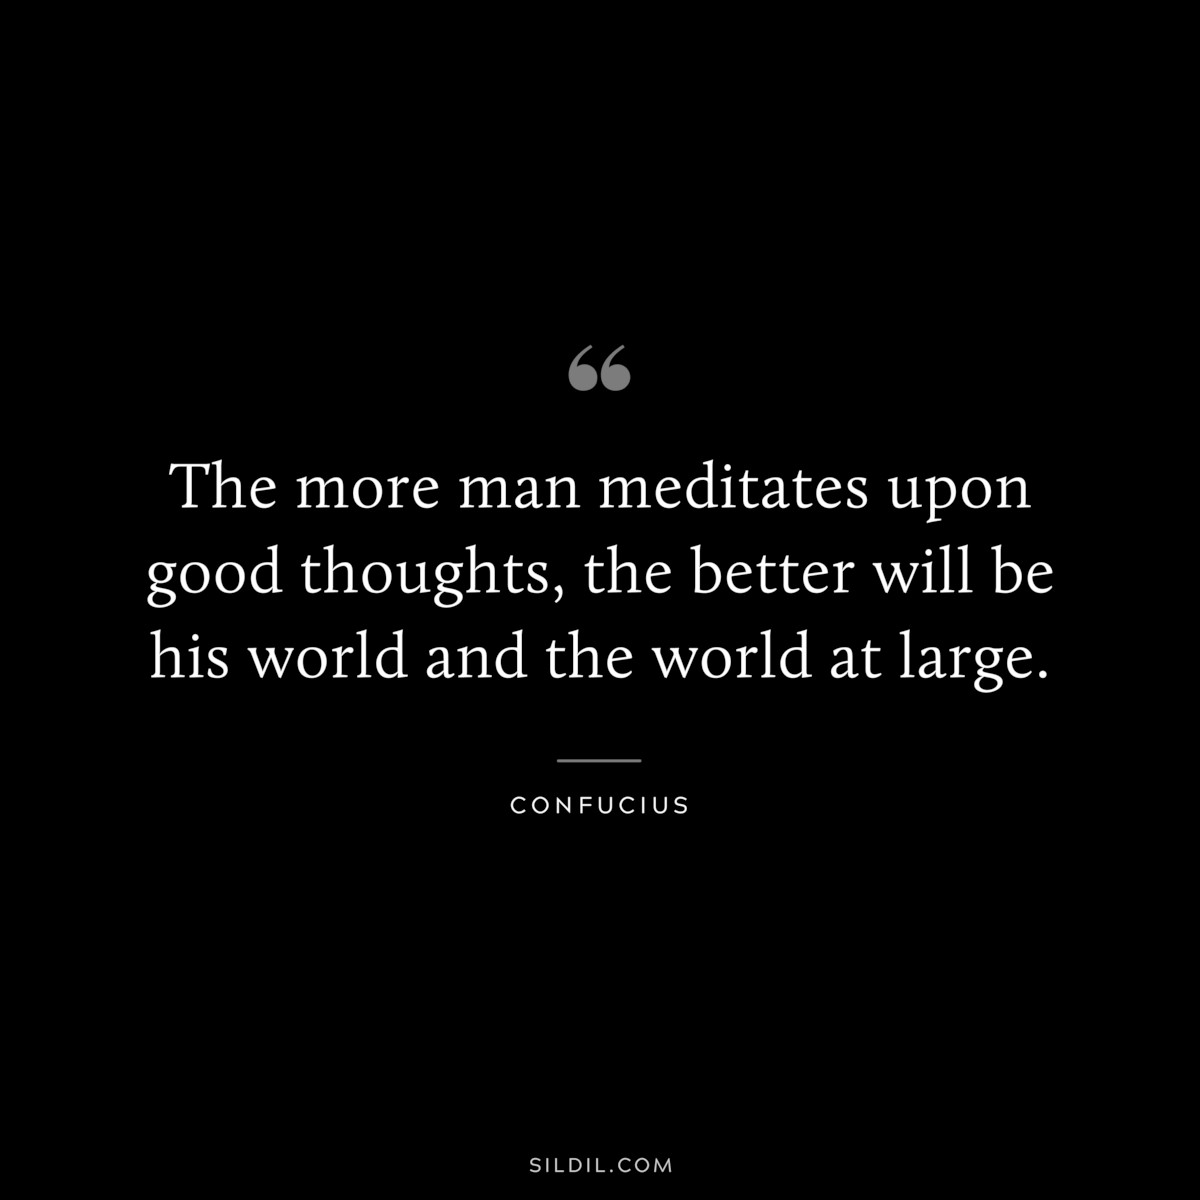 The more man meditates upon good thoughts, the better will be his world and the world at large. ― Confucius